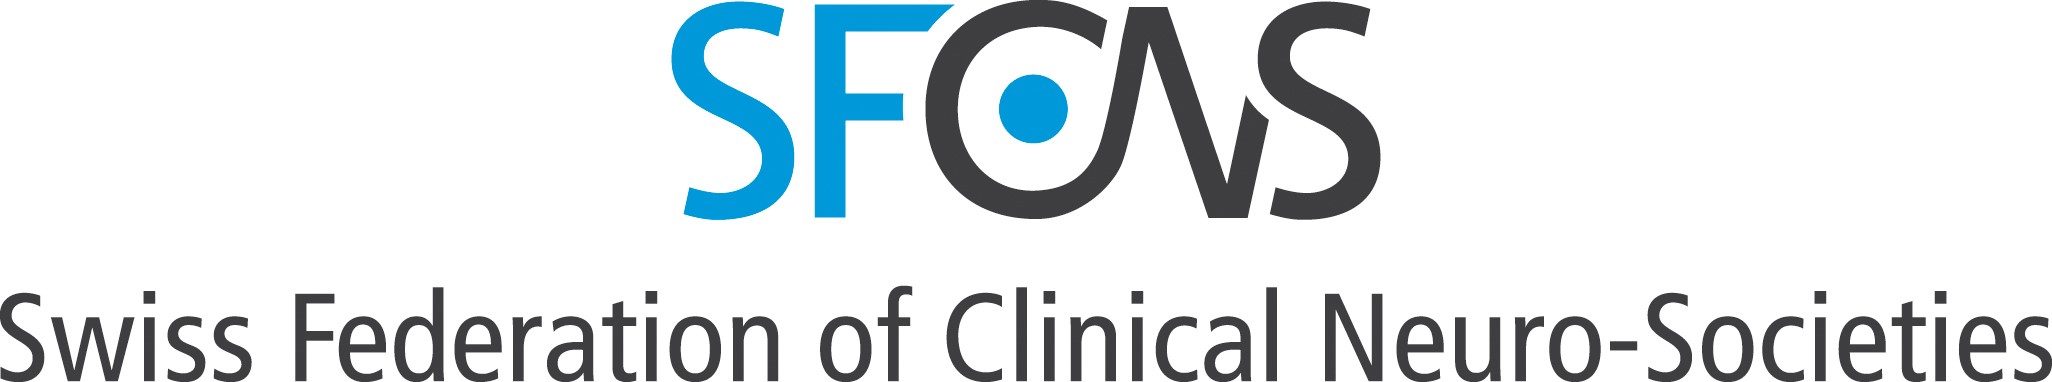 Swiss Federation of Clinical Neuro Societies